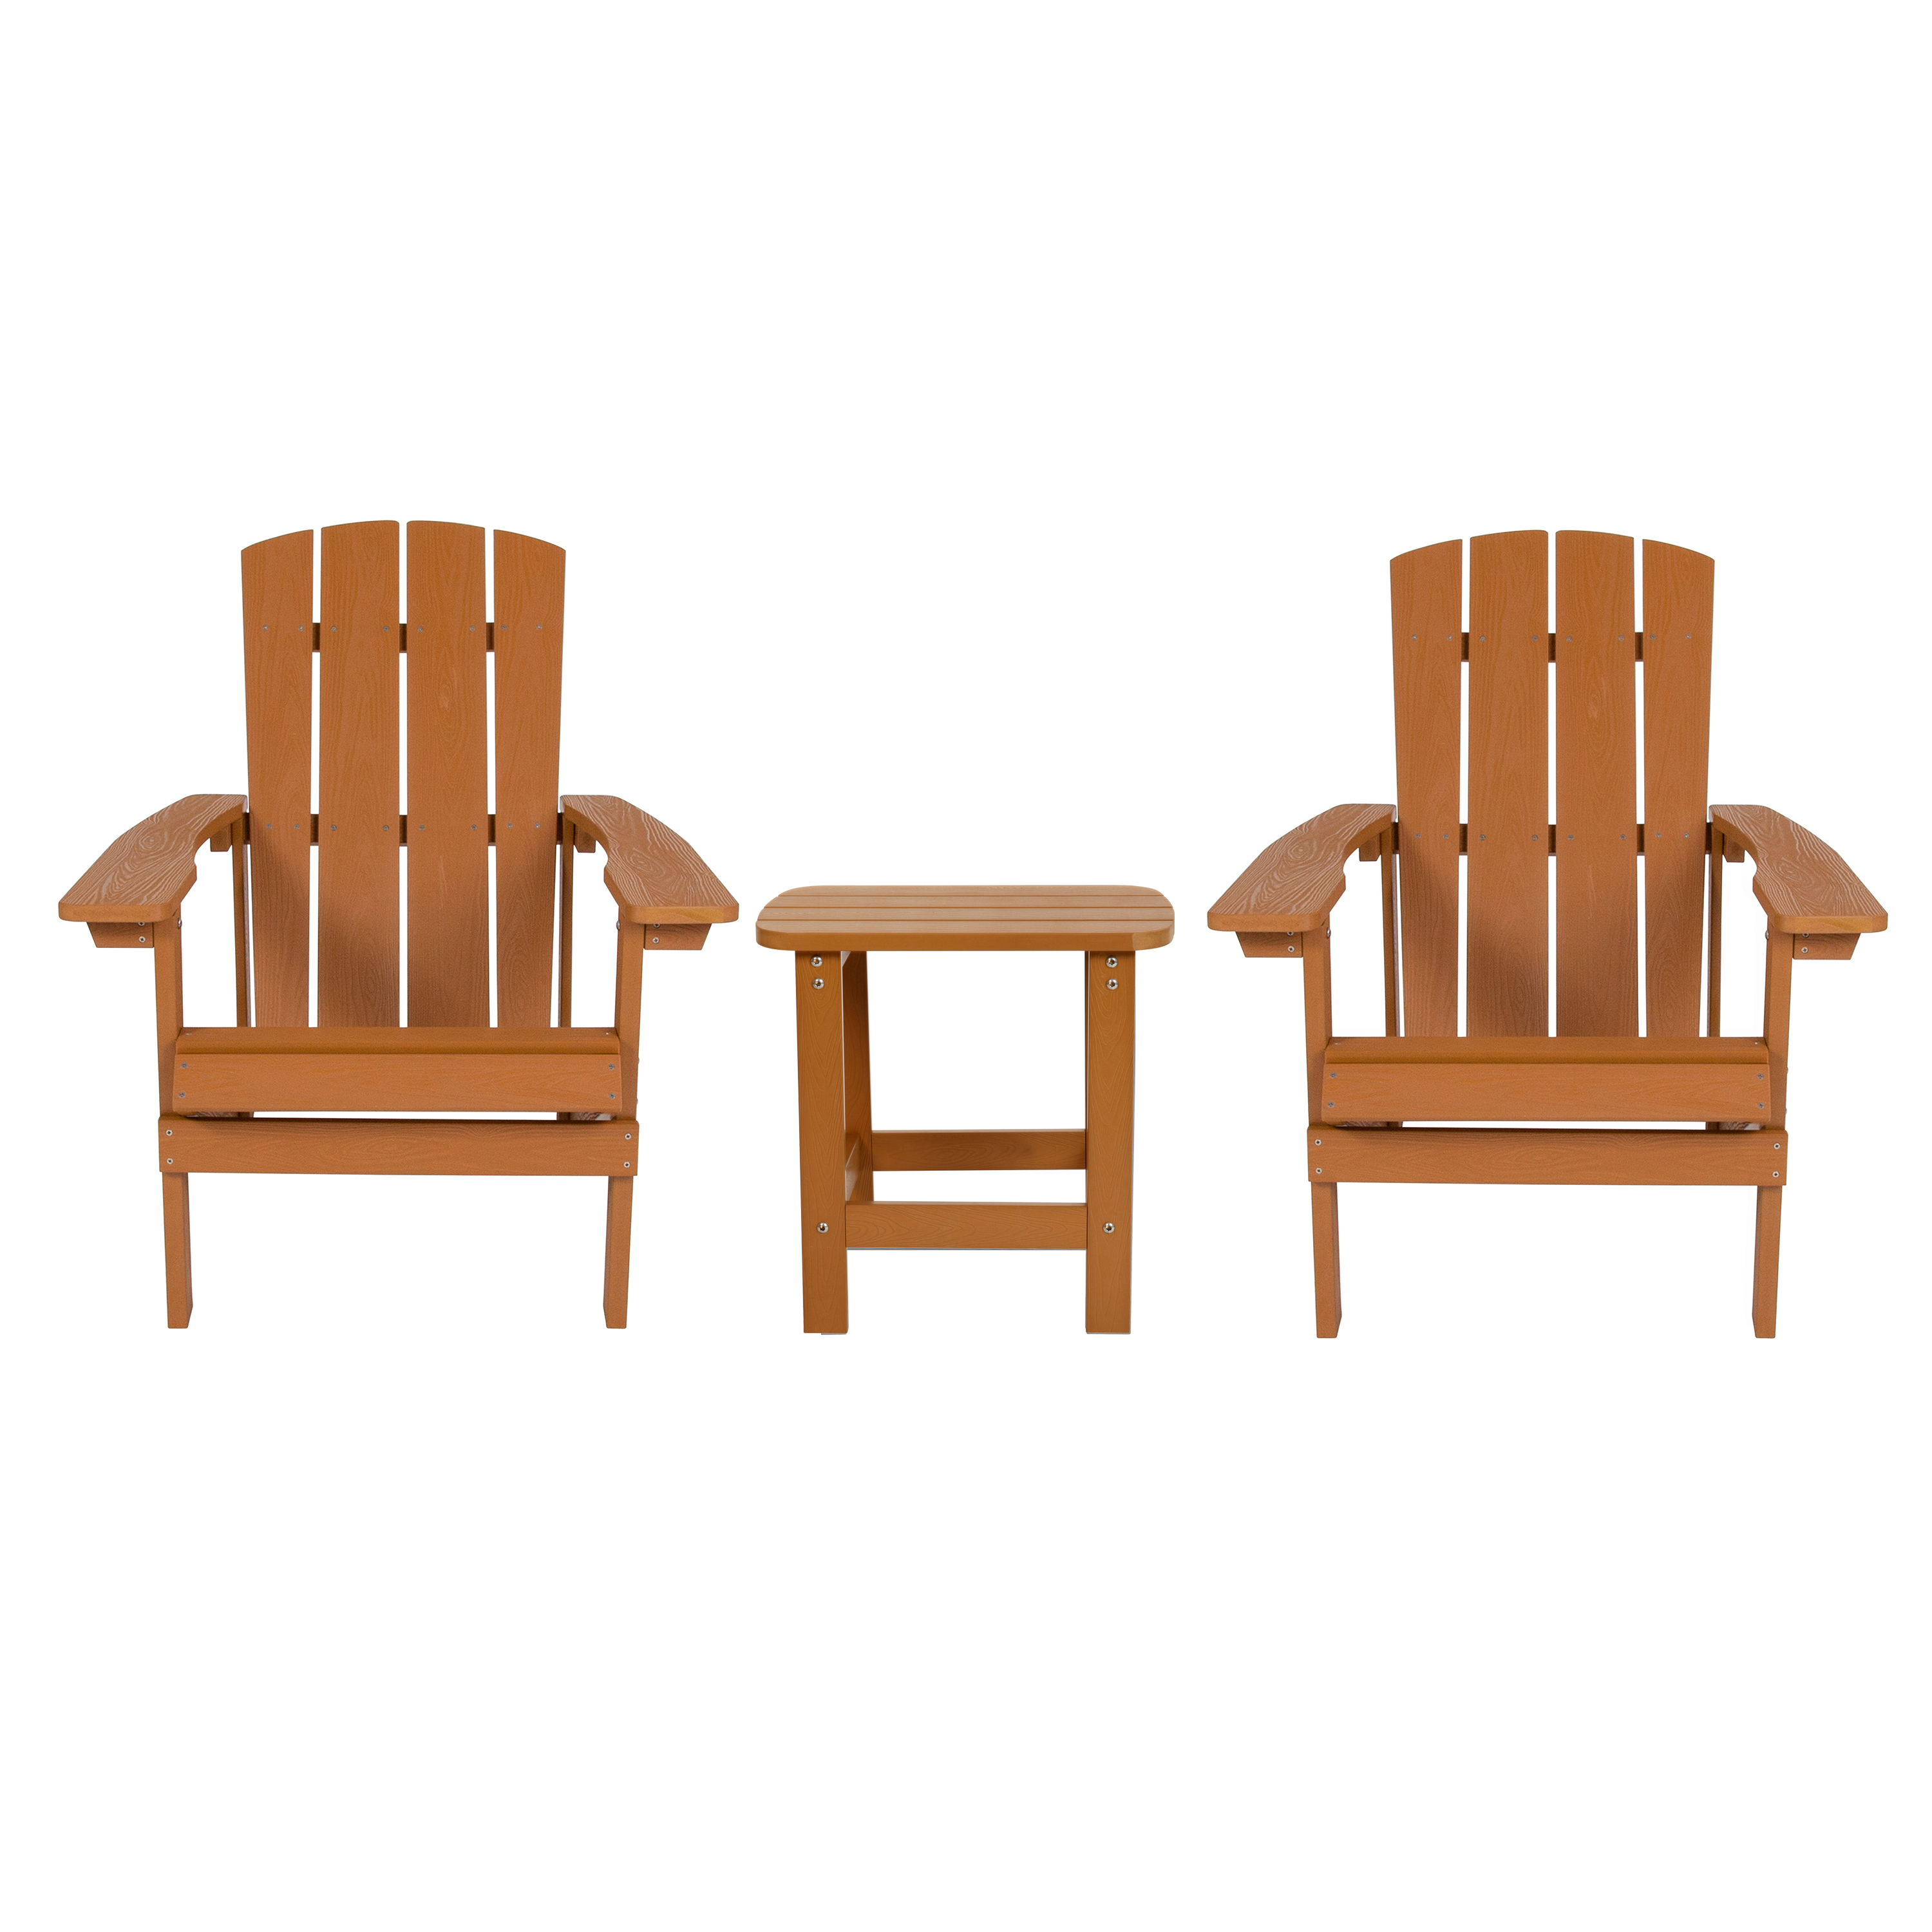 Flash Furniture JJ-C14501-2-T14001-TEAK-GG Teak All-Weather Poly Resin Wood Adirondack Chair with Side Table, 2 Pack 